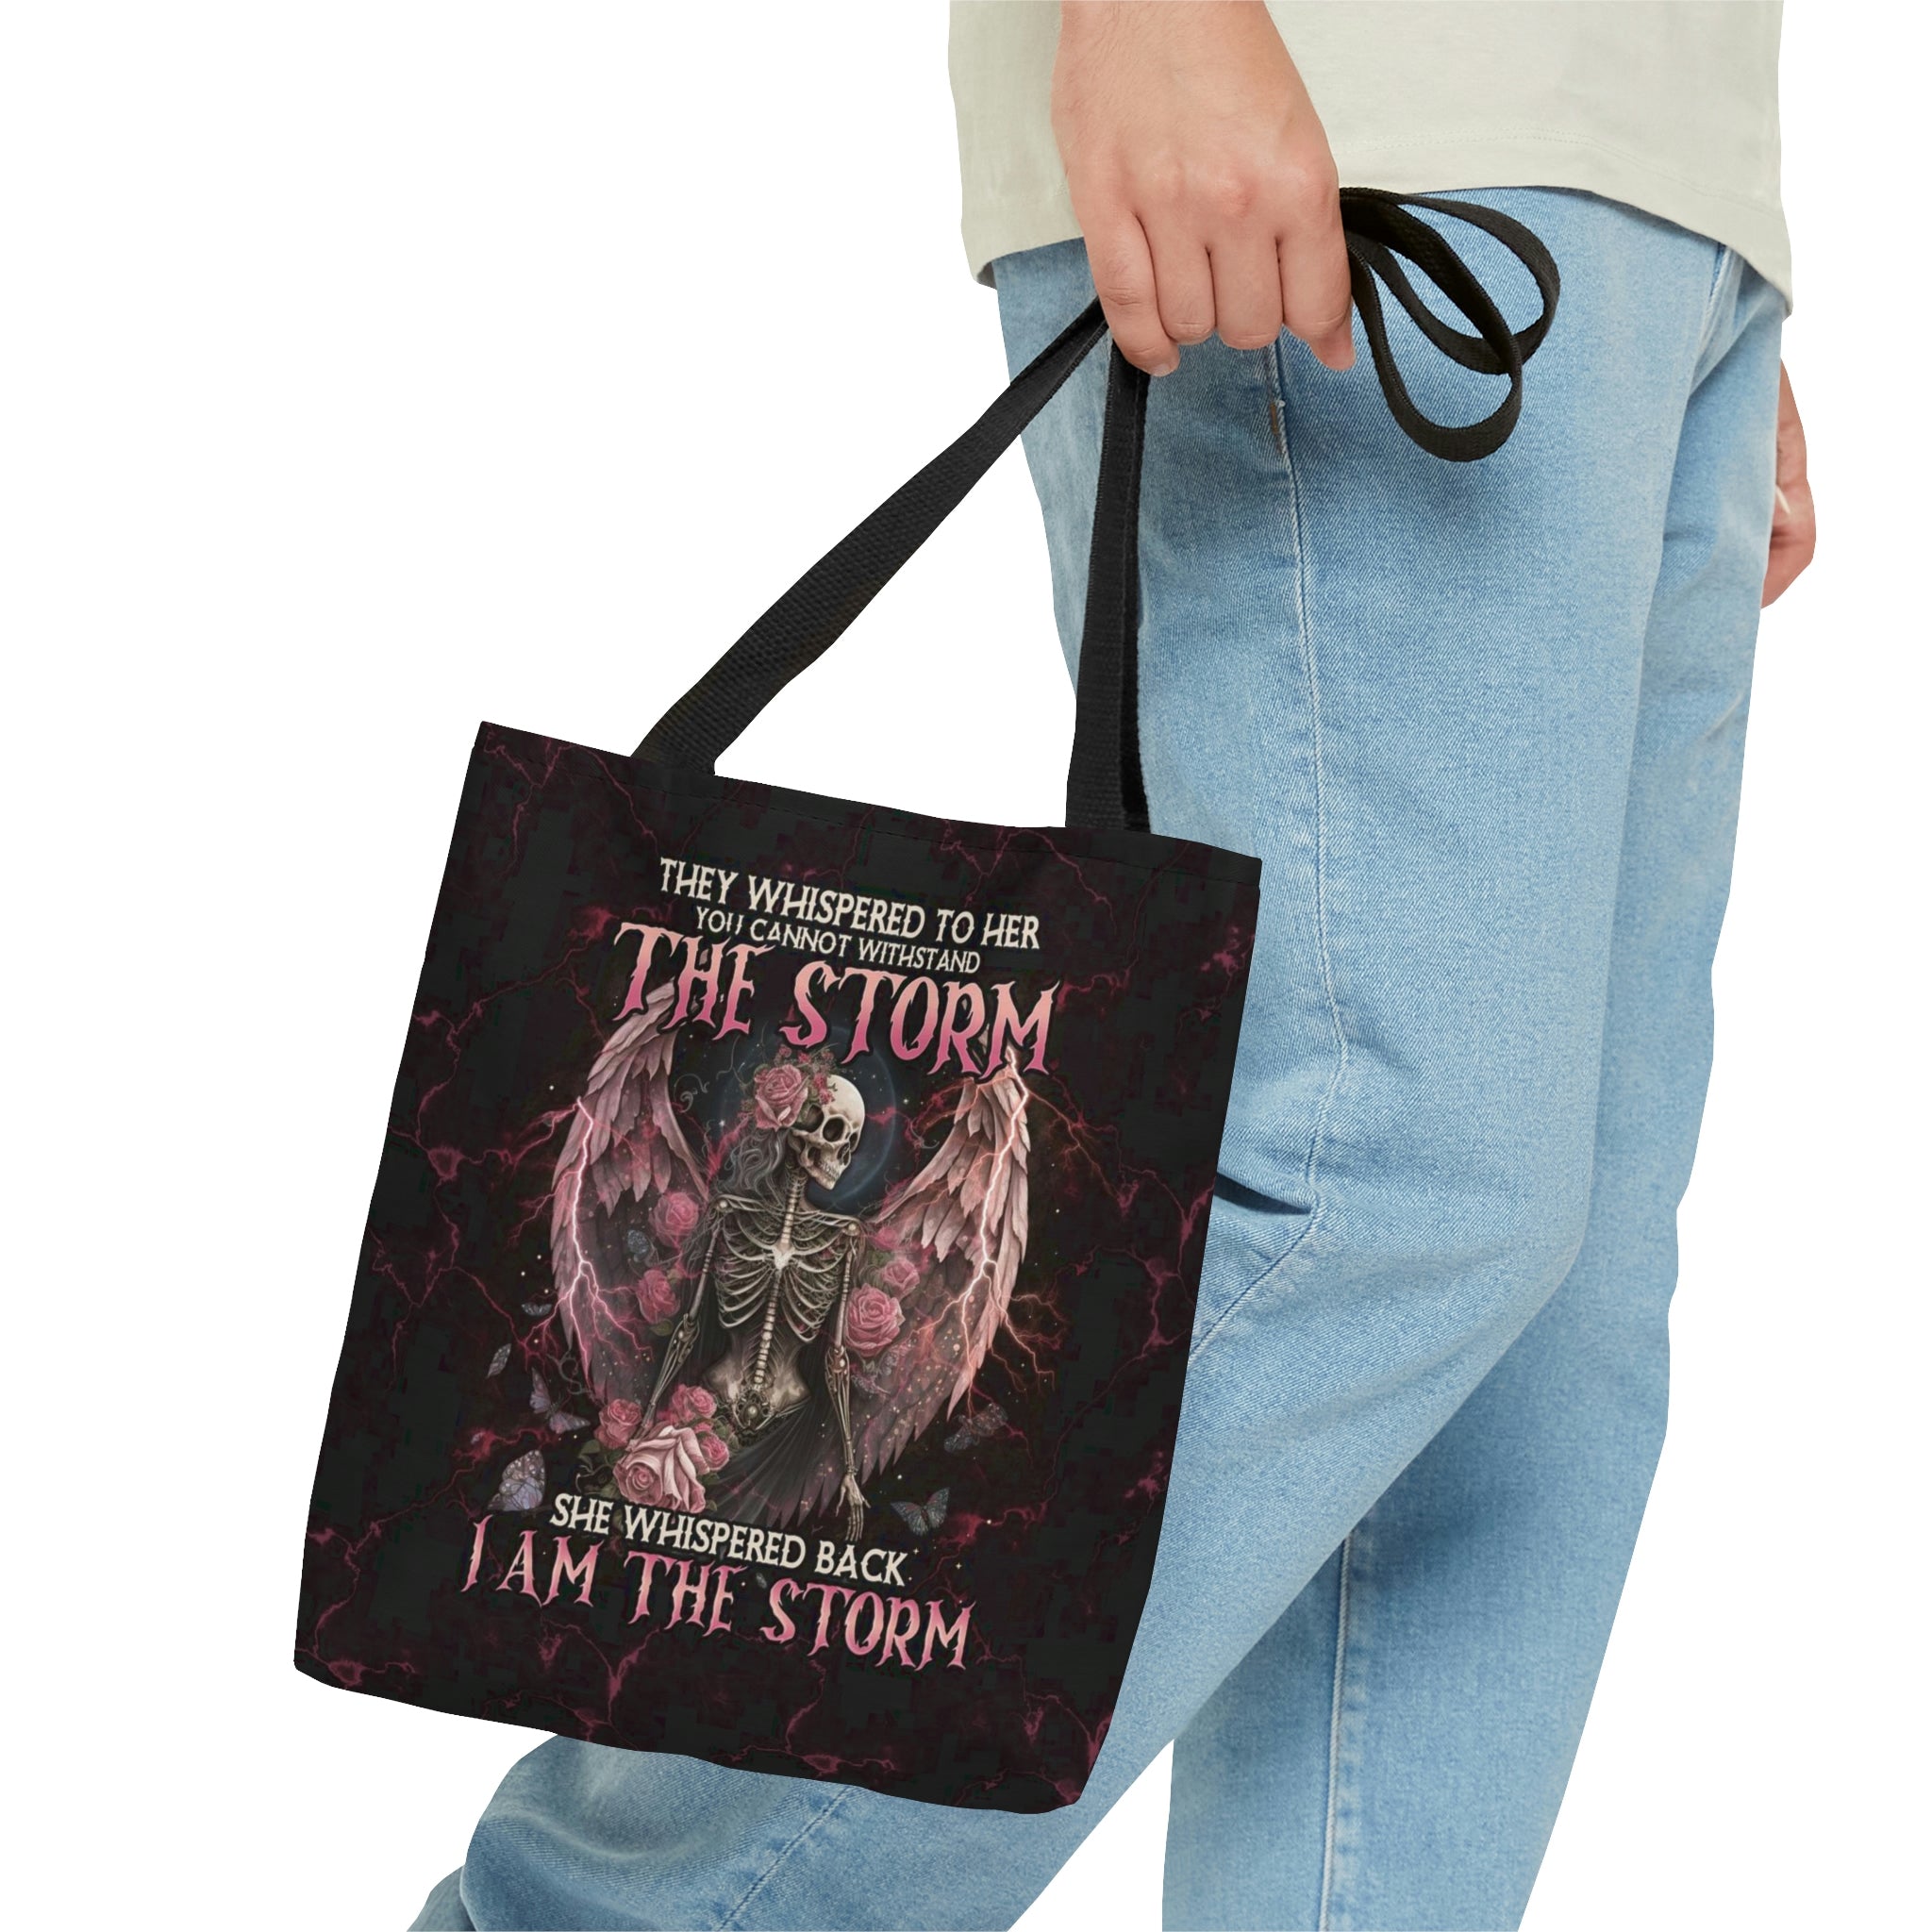 I AM THE STORM SKELETON ROSES WINGS TOTE BAG - TLNO0602235